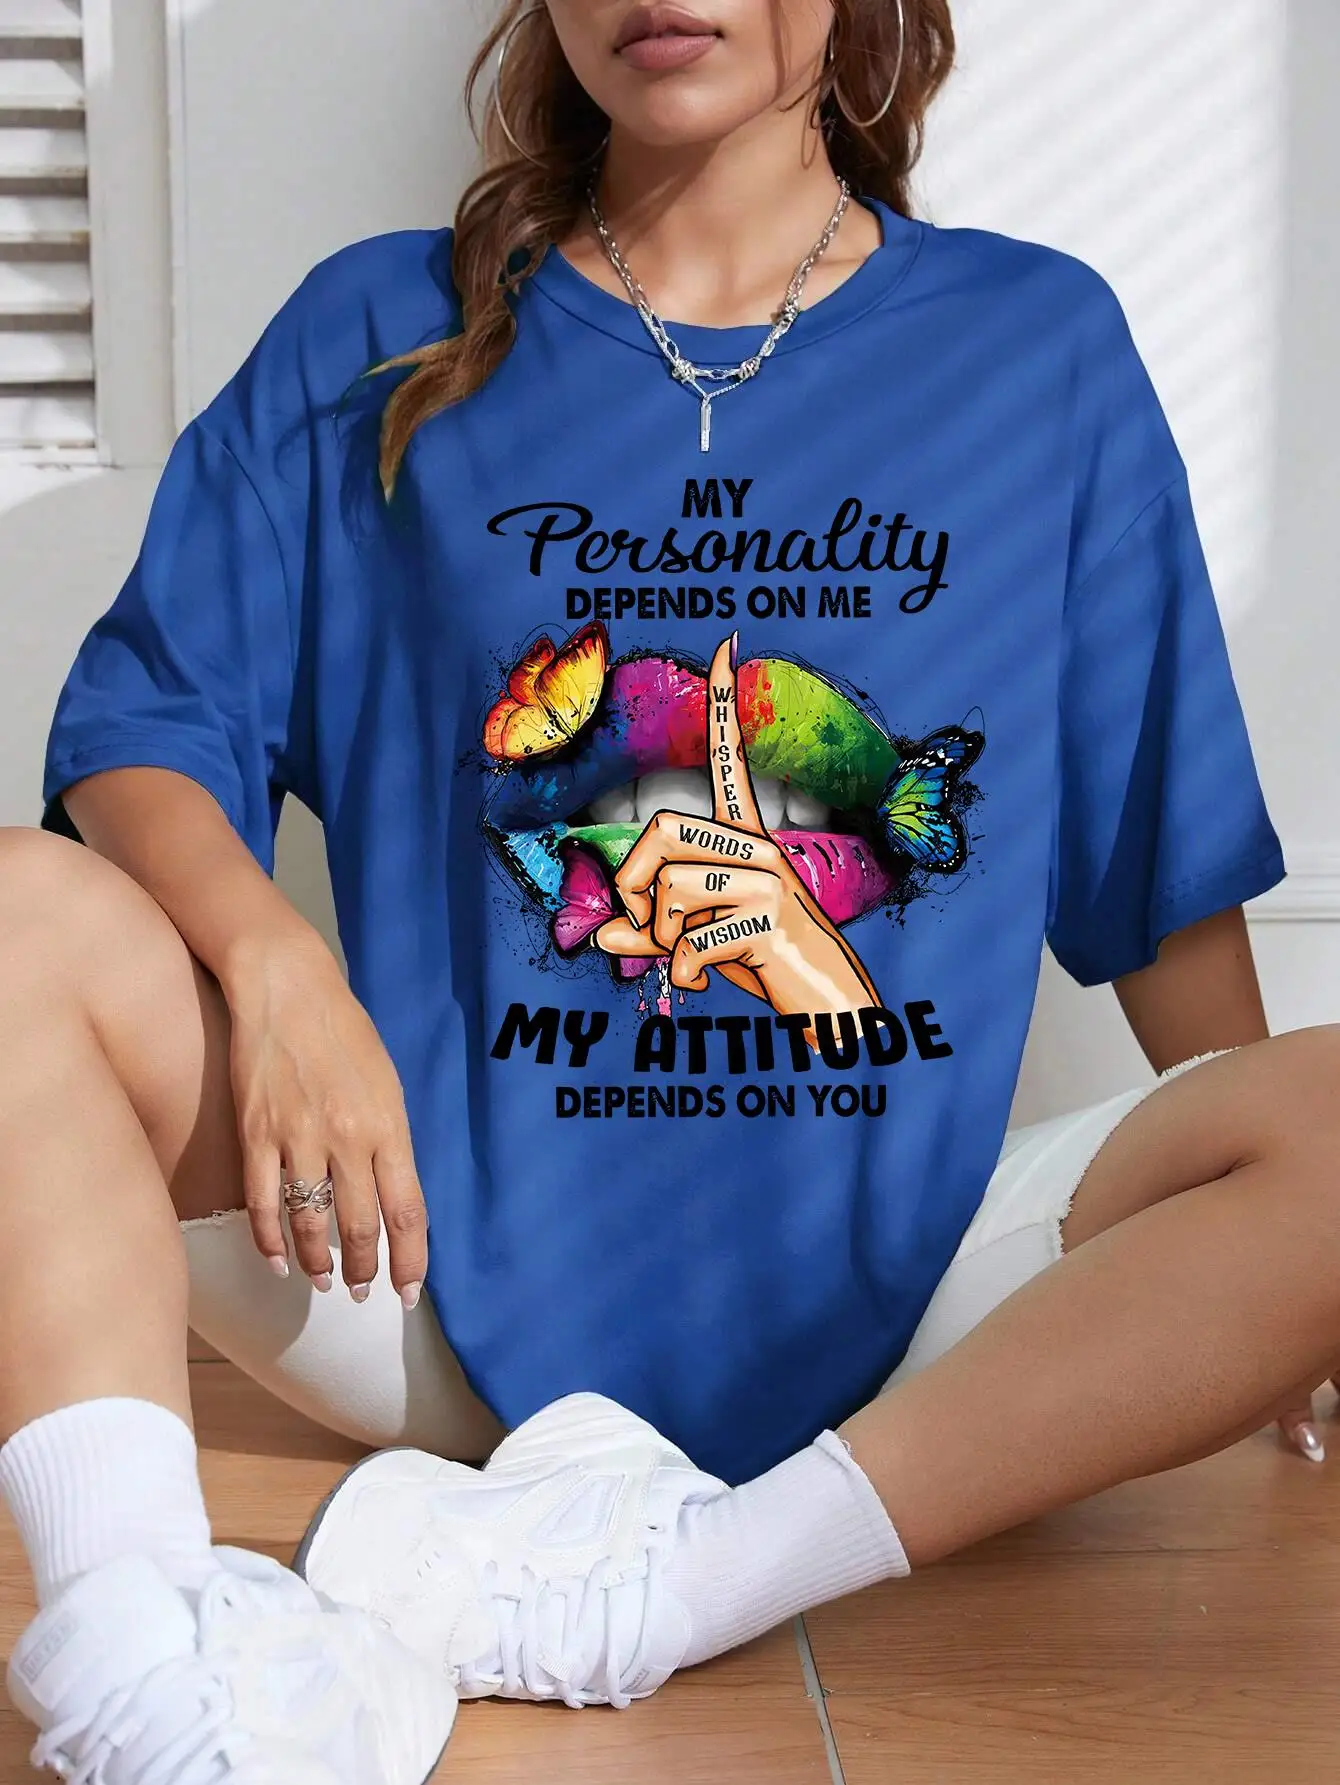 Painted Lips And Hands T-Shirt Women Casual Cotton T Shirt Soft Street Short Sleeve Fashion Comfortable All Match Tops Female